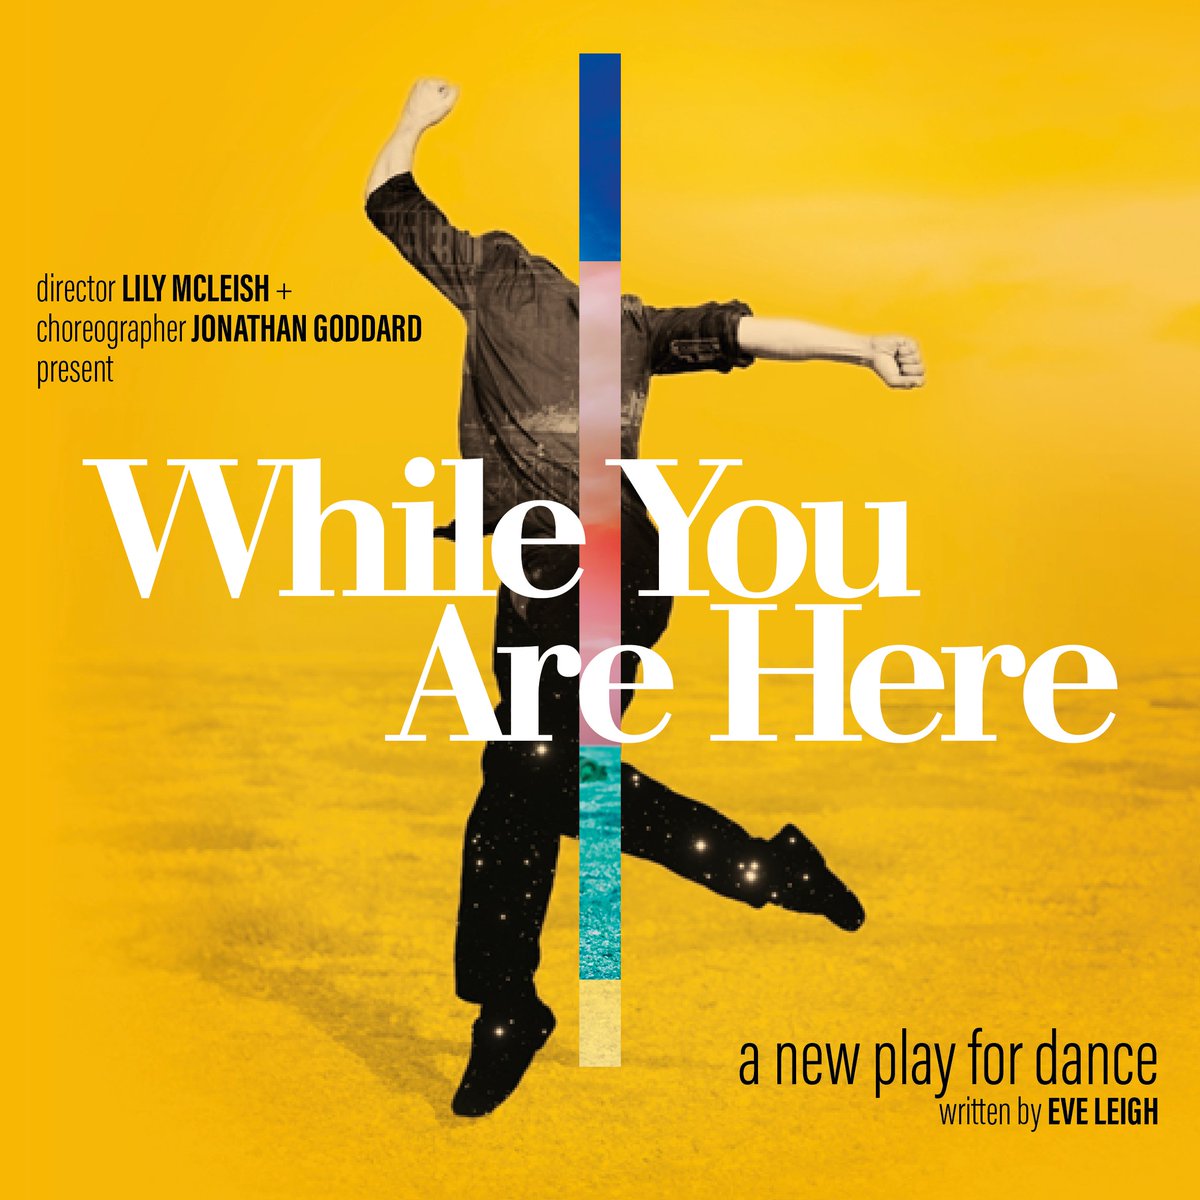 5 weeks to go until we open #WhileYouAreHere @dance_east. My latest project with director @lily_mcleish and writer @EevLee. #newplayfordance #dance #theatre #play @theplacelondon